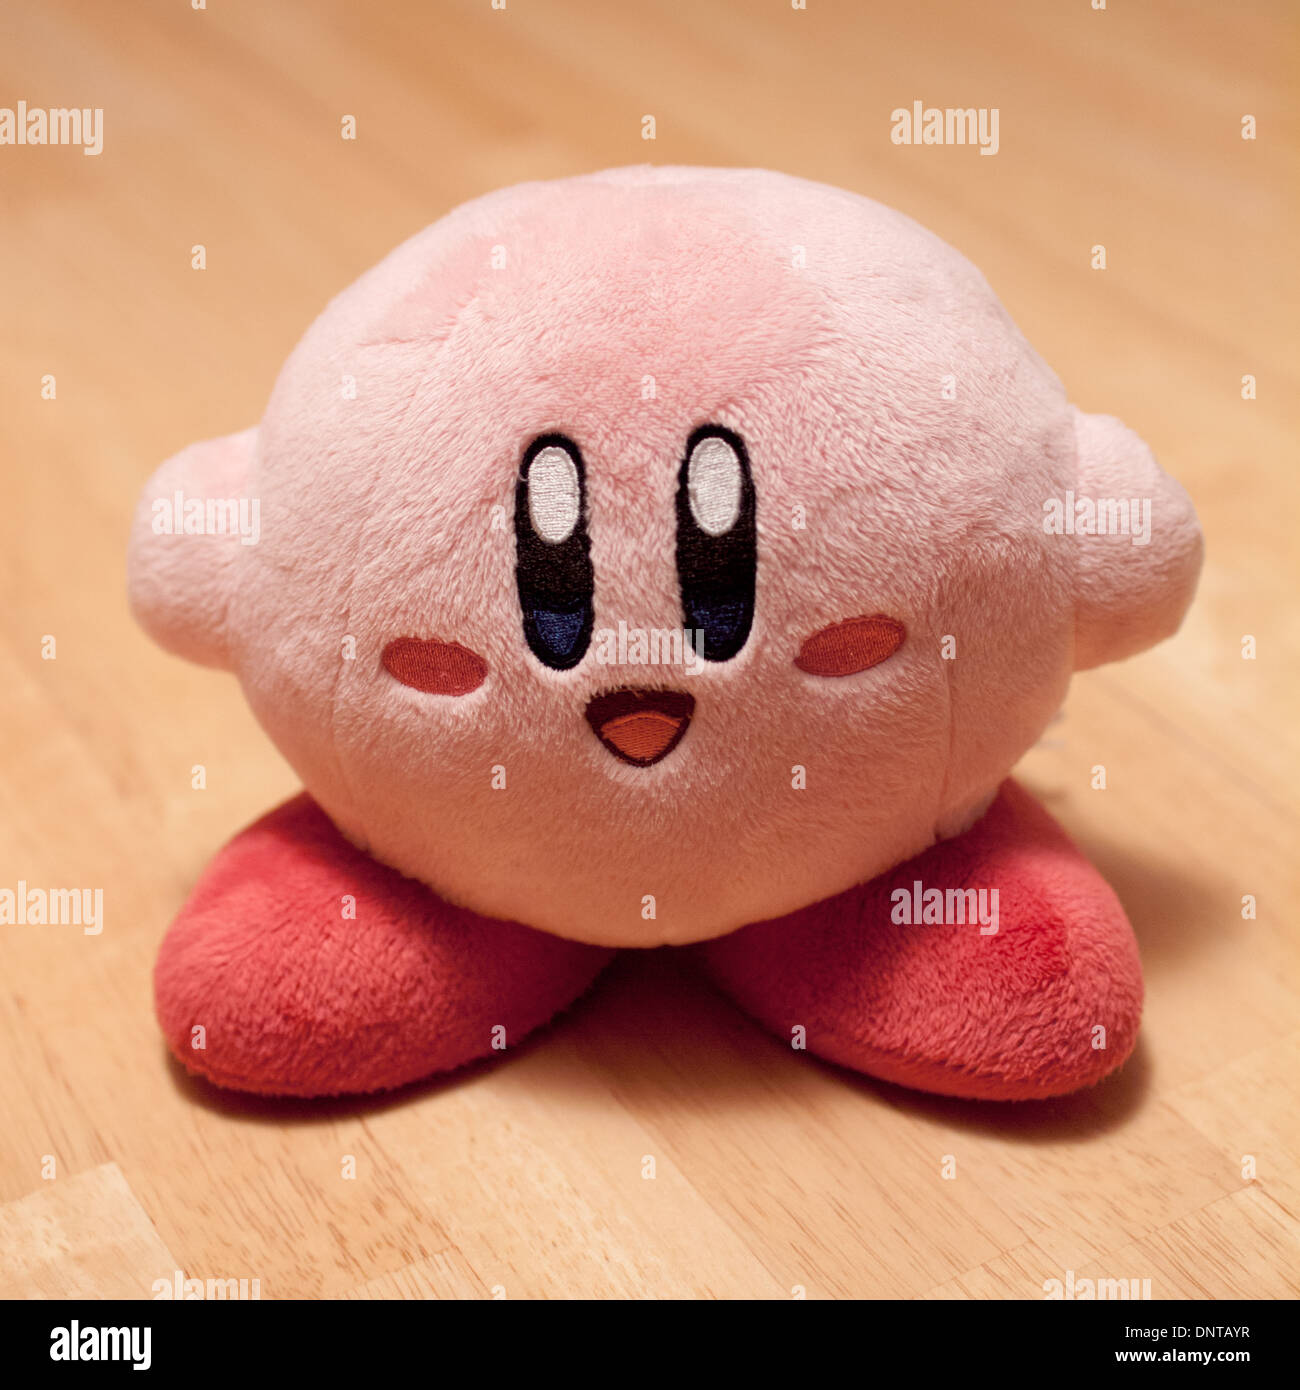 A plush Kirby. Kirby (カービ) is a fictional character in the Kirby video game series by HAL Laboratory and Nintendo. Stock Photo